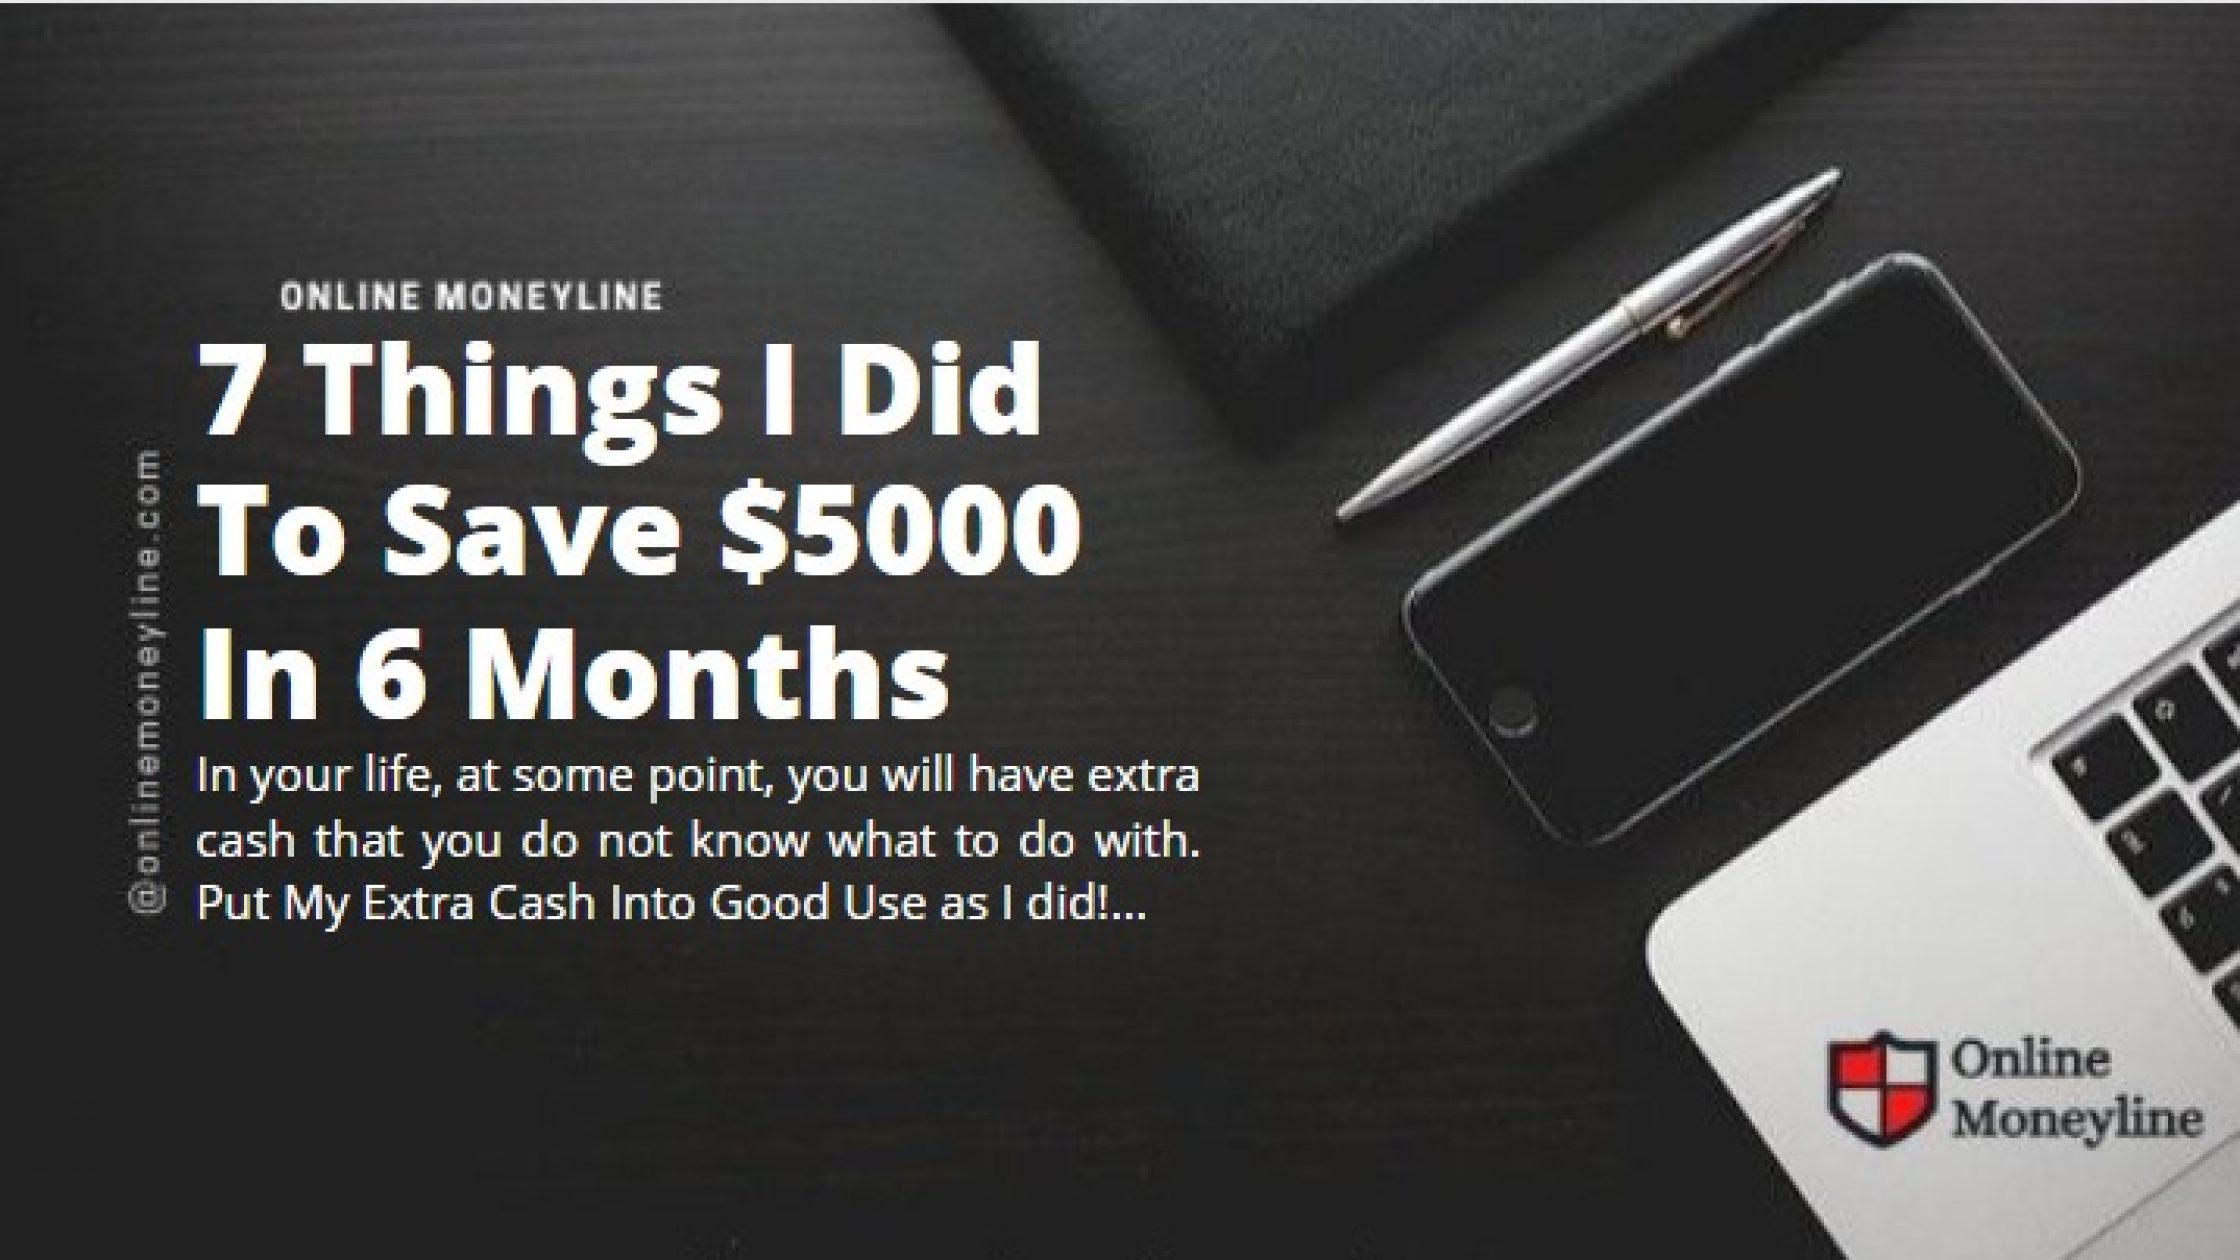 7 Things I Did To Save $5000 In 6 Months